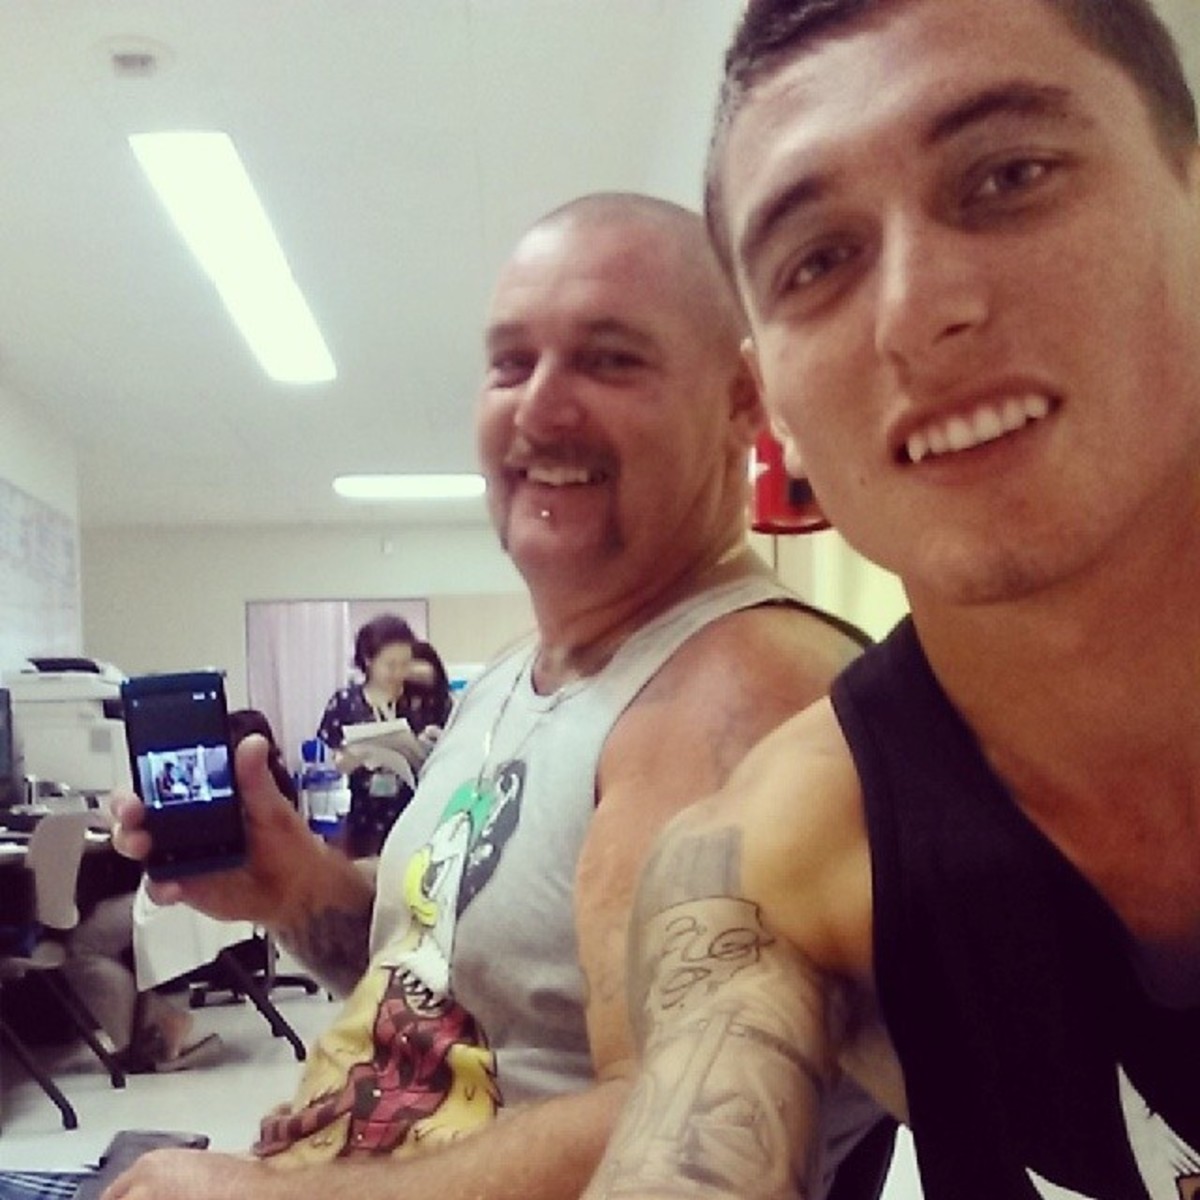 Instagram caption: Once again at my monthly check up with my big supporter, my Dad.